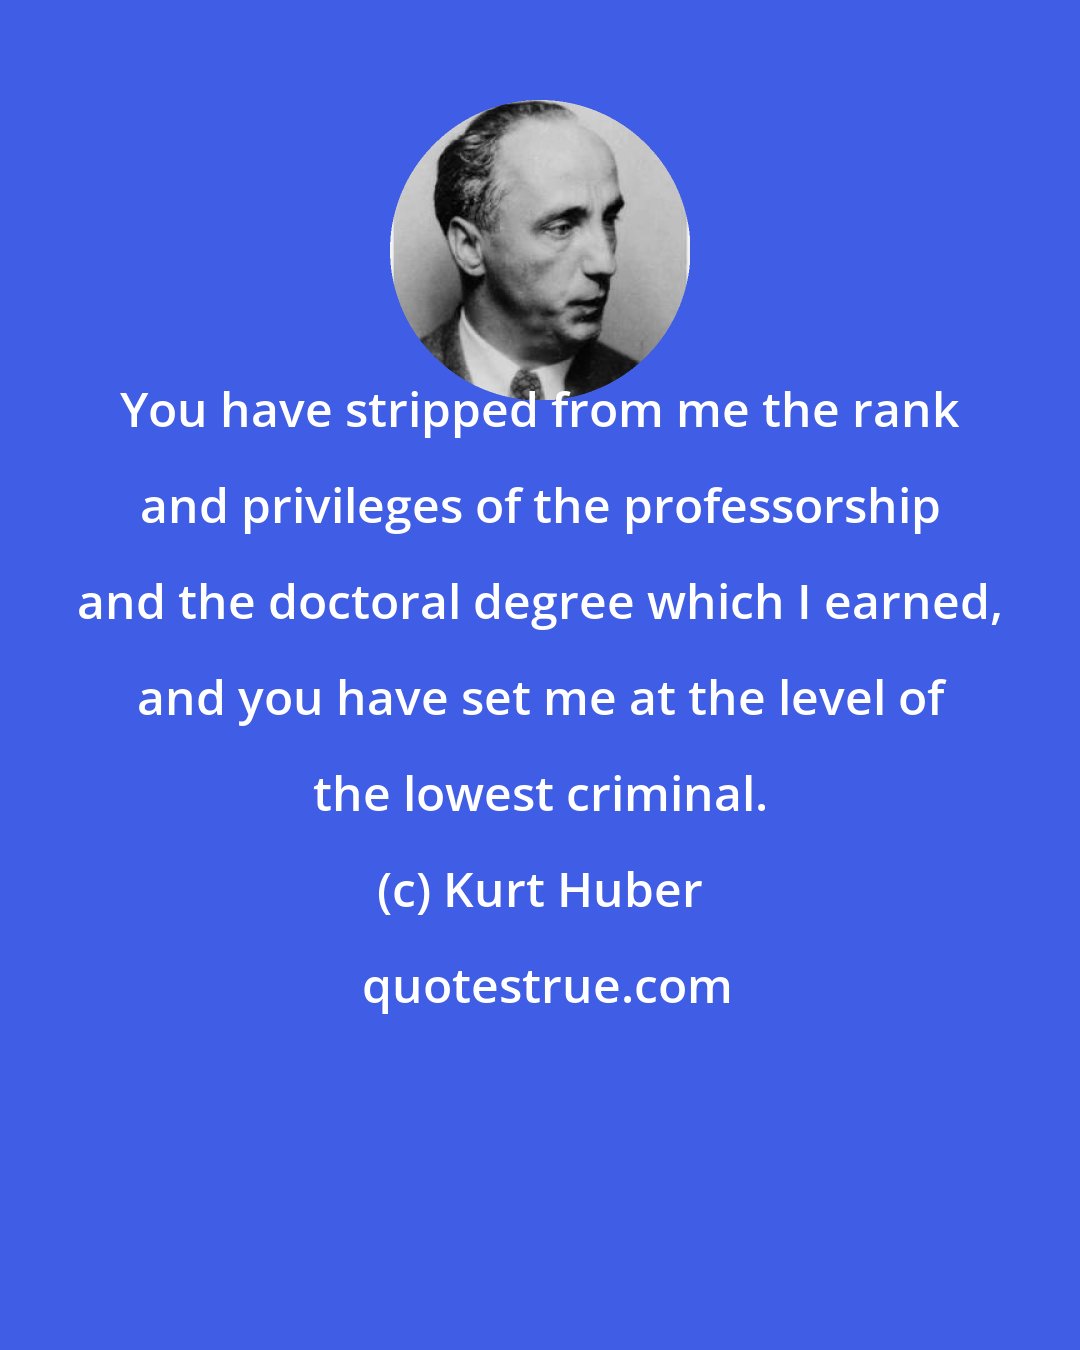 Kurt Huber: You have stripped from me the rank and privileges of the professorship and the doctoral degree which I earned, and you have set me at the level of the lowest criminal.